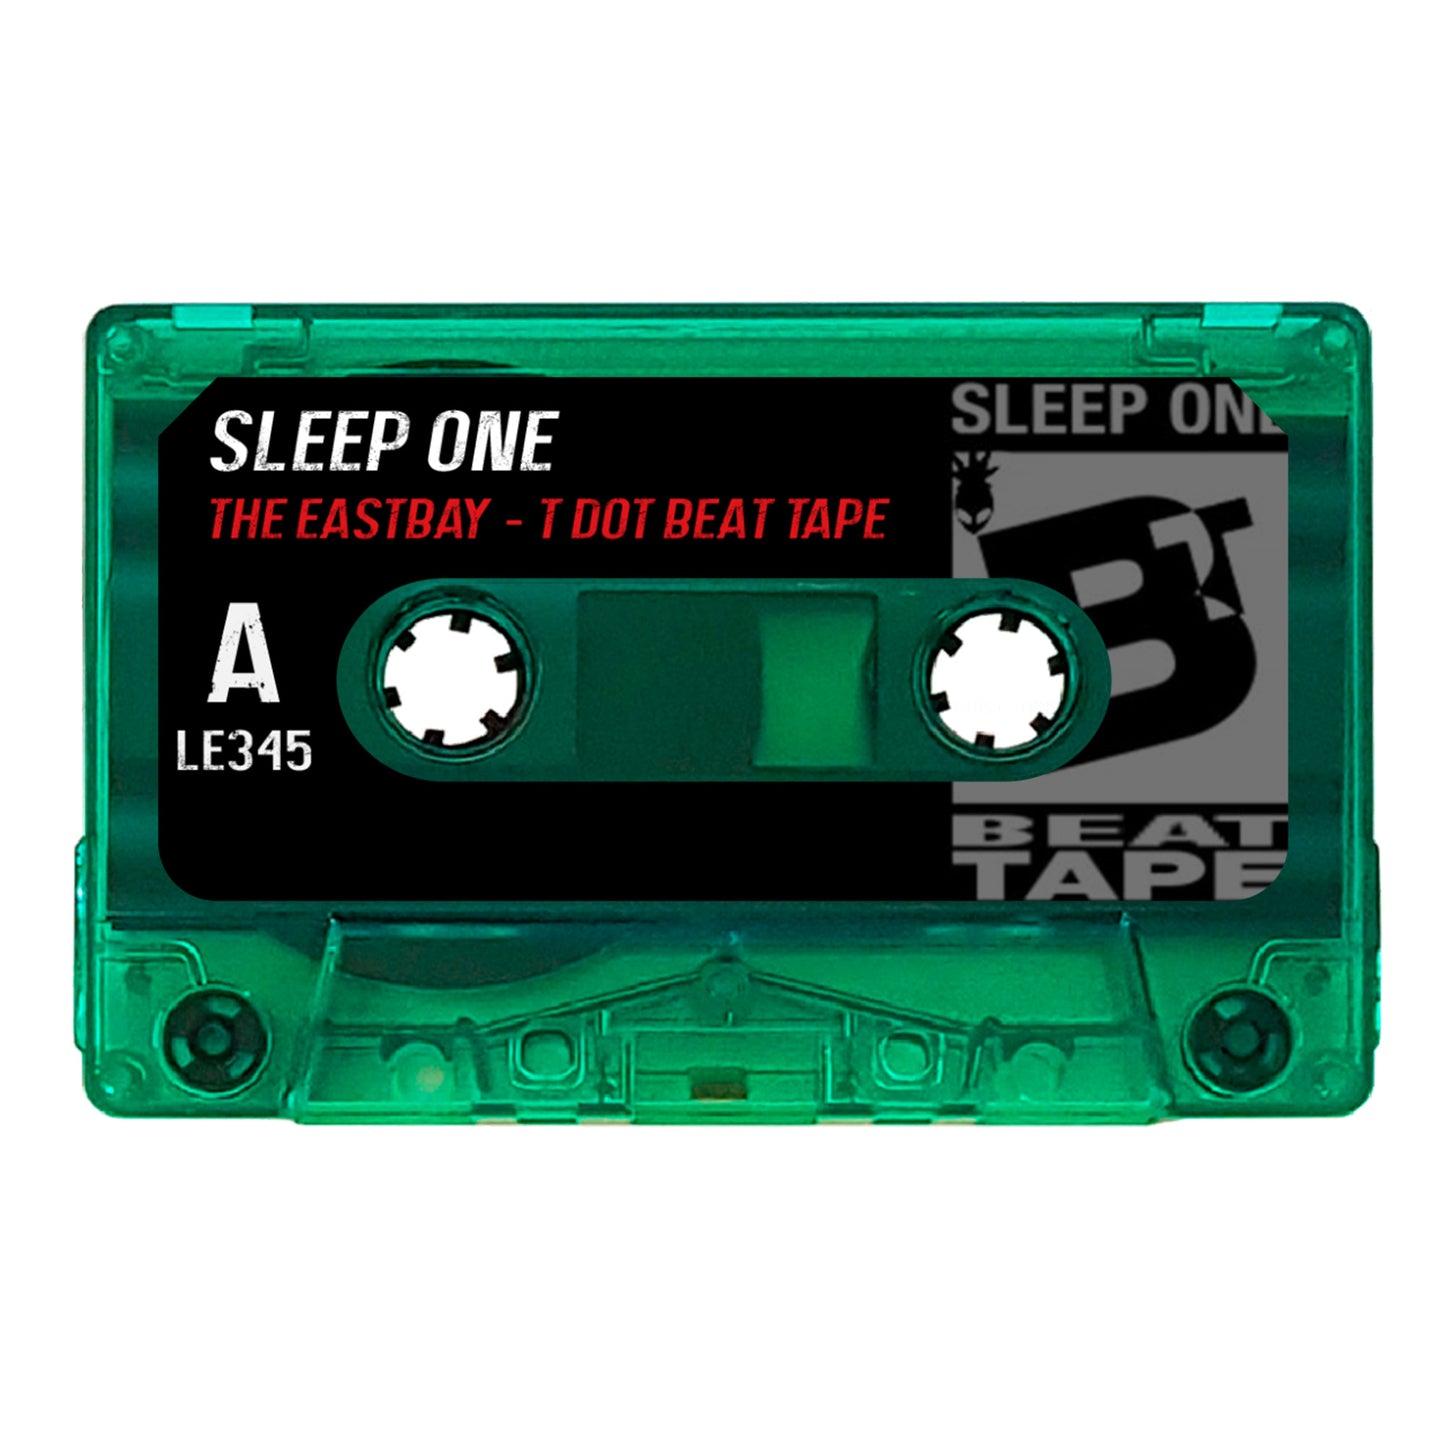 Sleep One - "The Eastbay - T Dot Beat Tape" Limited Edition Cassette Tape